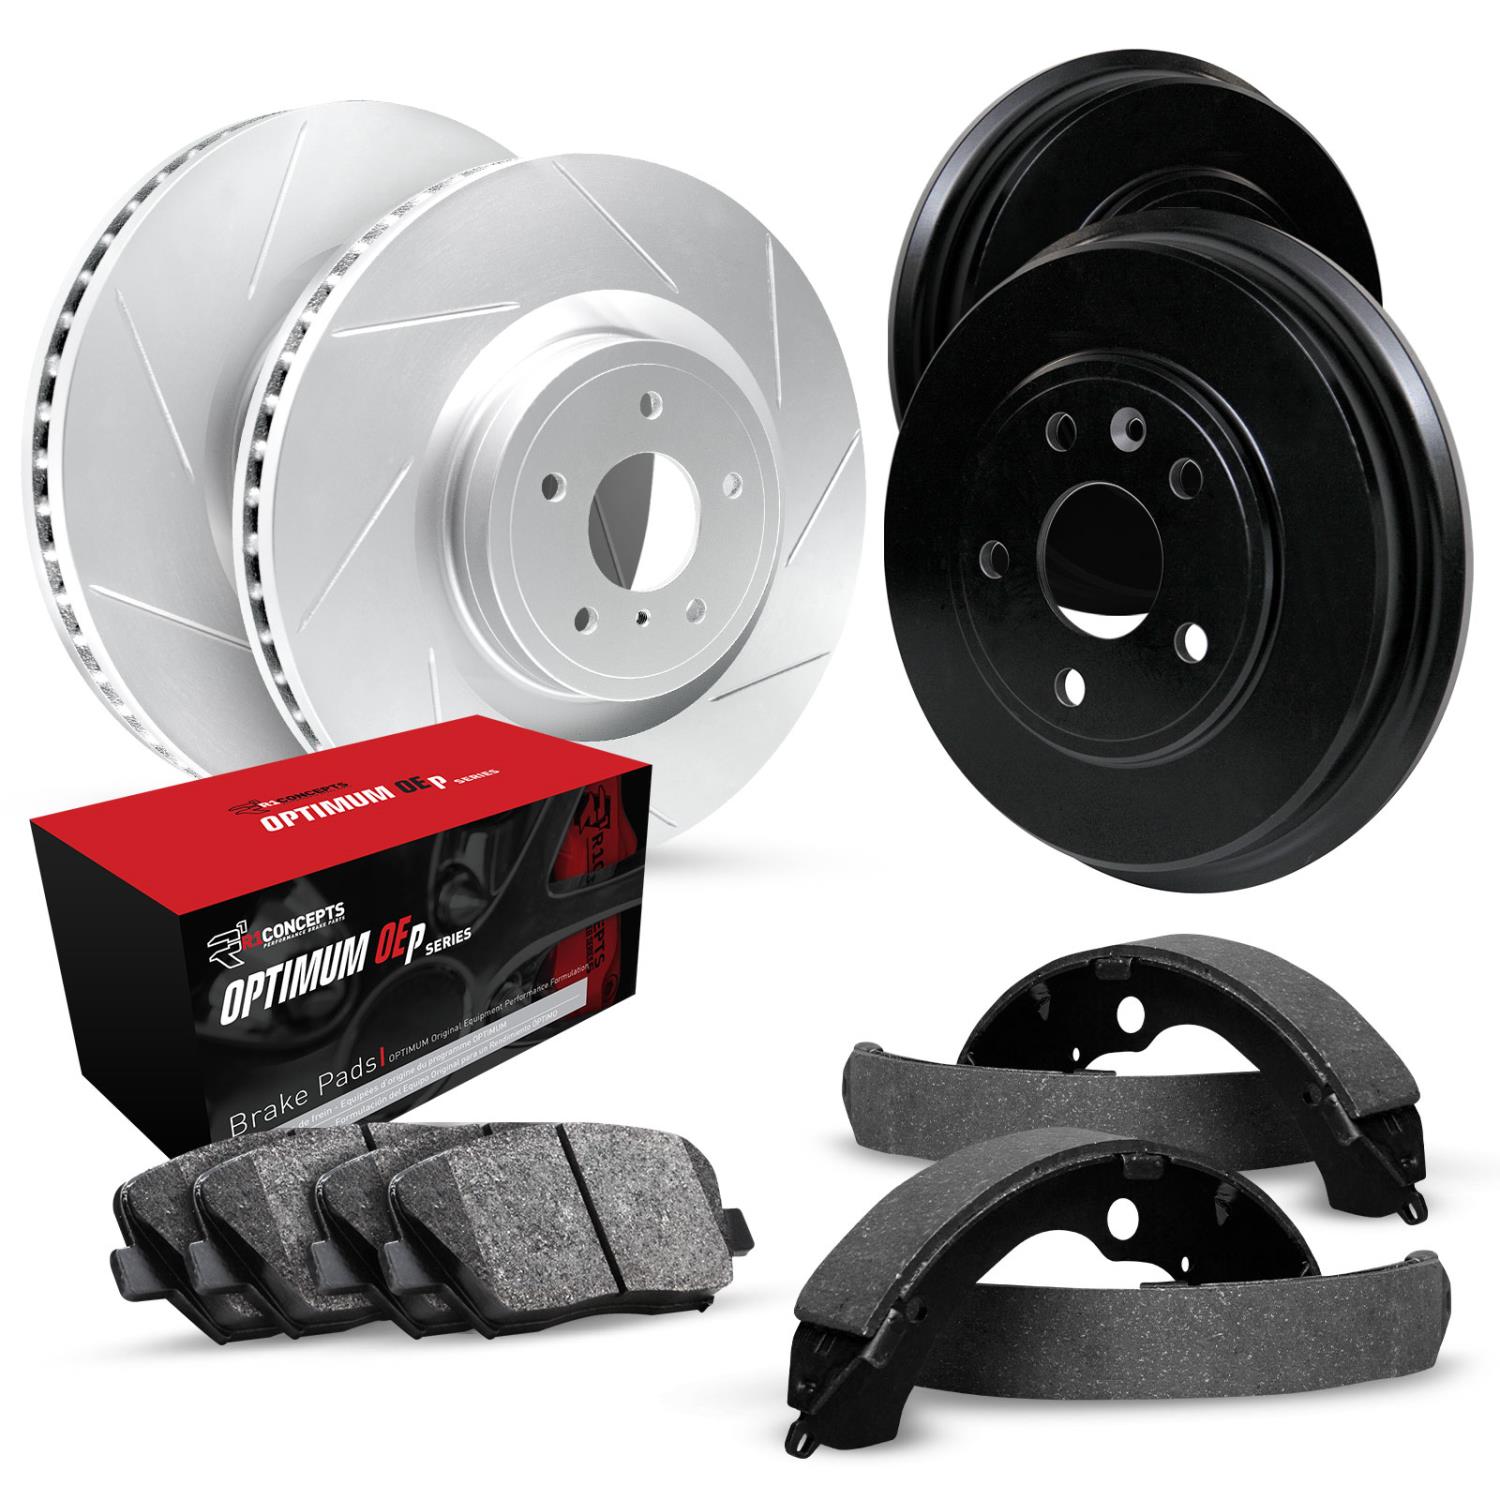 GEO-Carbon Slotted Brake Rotor & Drum Set w/Optimum OE Pads & Shoes, 2006-2014 Lexus/Toyota/Scion, Position: Front & Rear